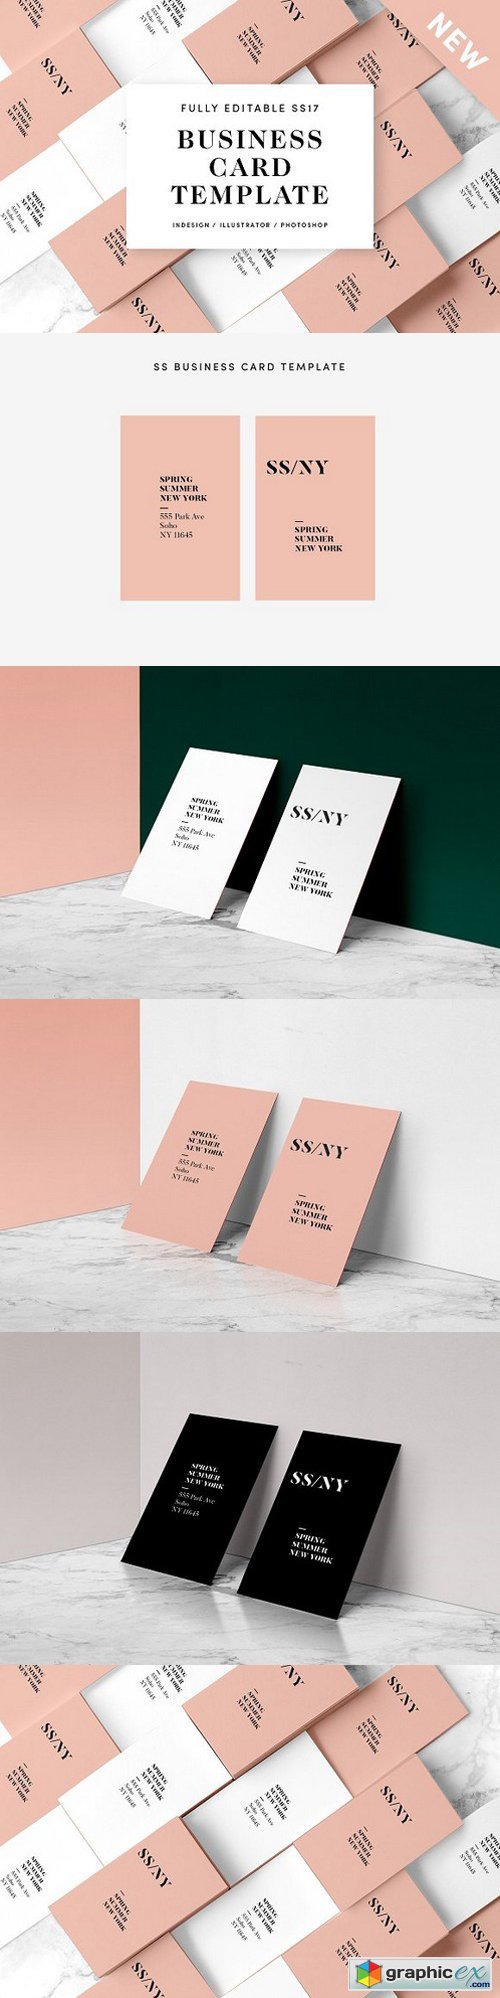 SS Fashion Business Card Template